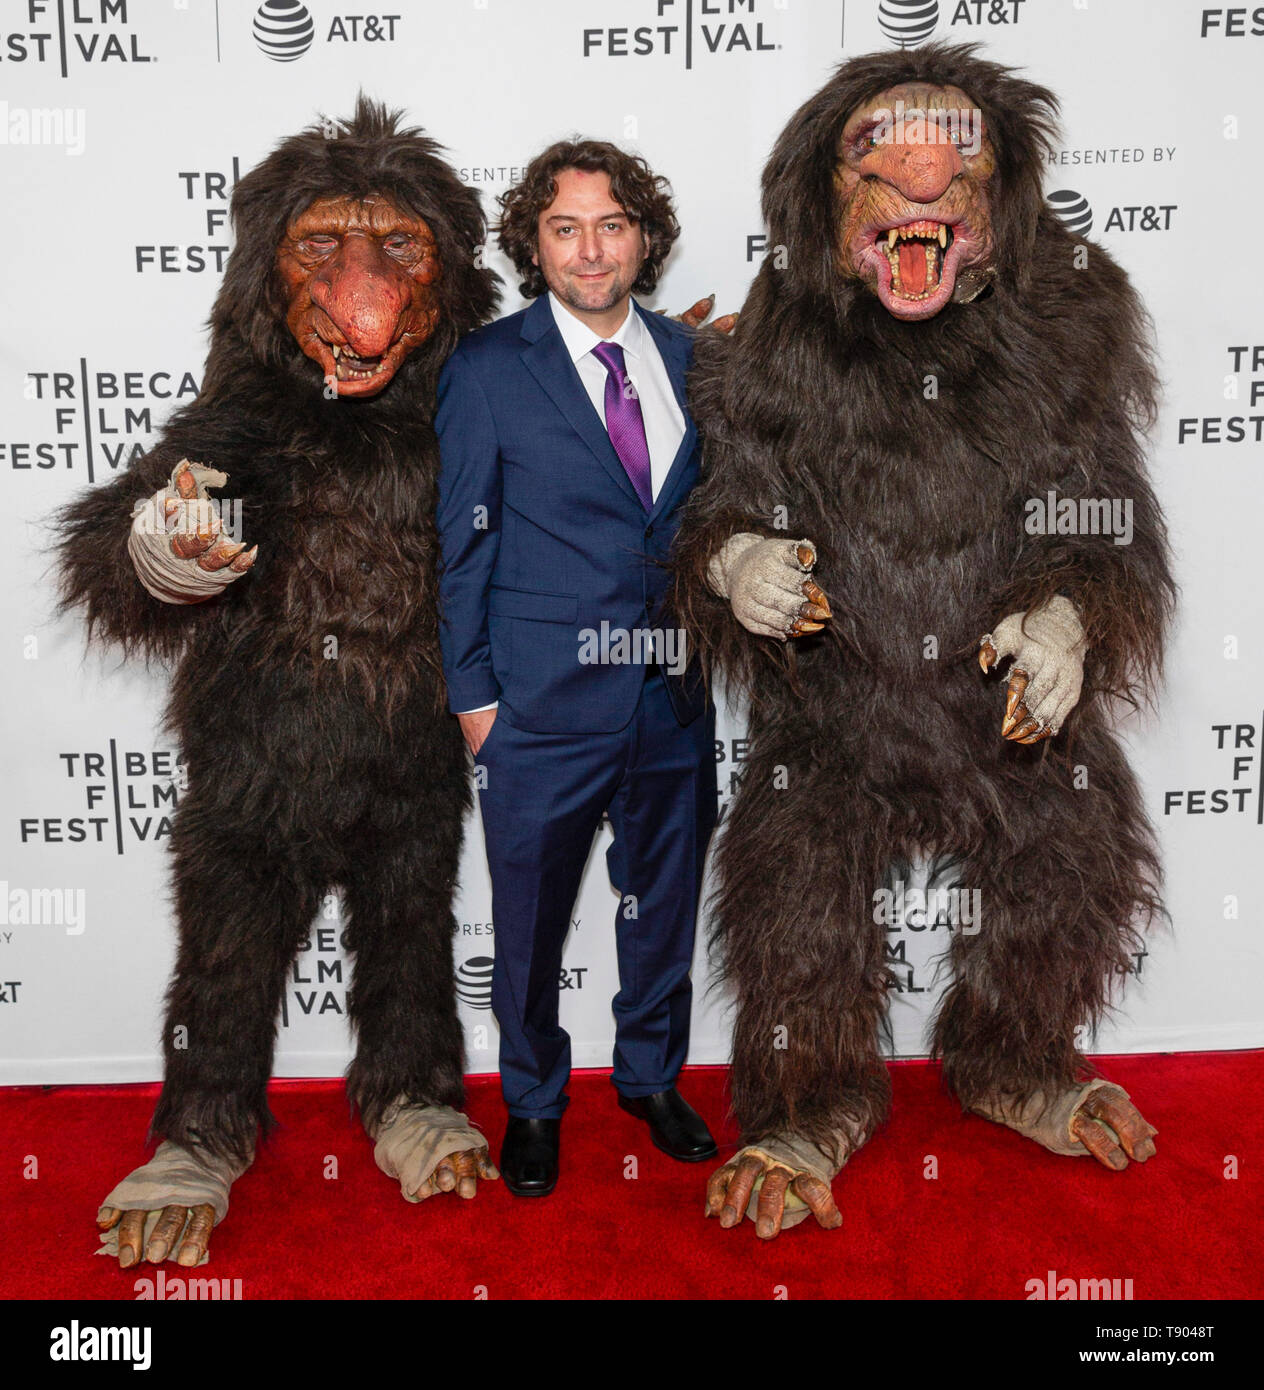 New York, NY - April 27, 2019: Mario Torres and Grumblers - Boomer and Morse attend the premiere of the 'The Place of No Words' during the 2019 Tribec Stock Photo